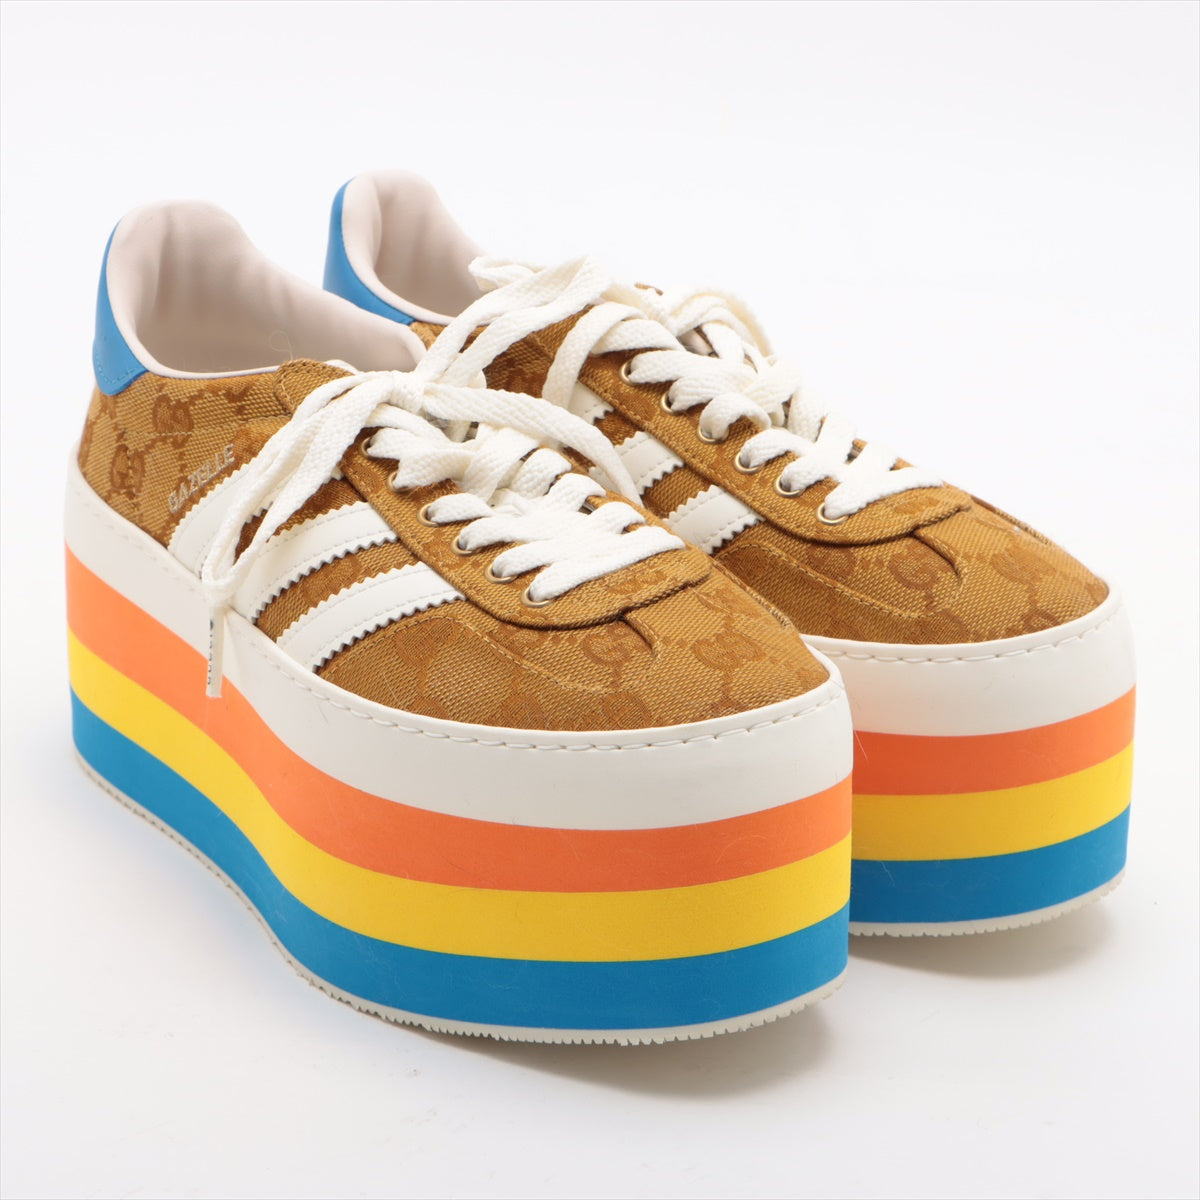 Gucci x adidas Leather x fabric Sneakers 21.5cm Ladies' Multicolor HQ7085 GAZELLE Midsole cracked There is hair adhering